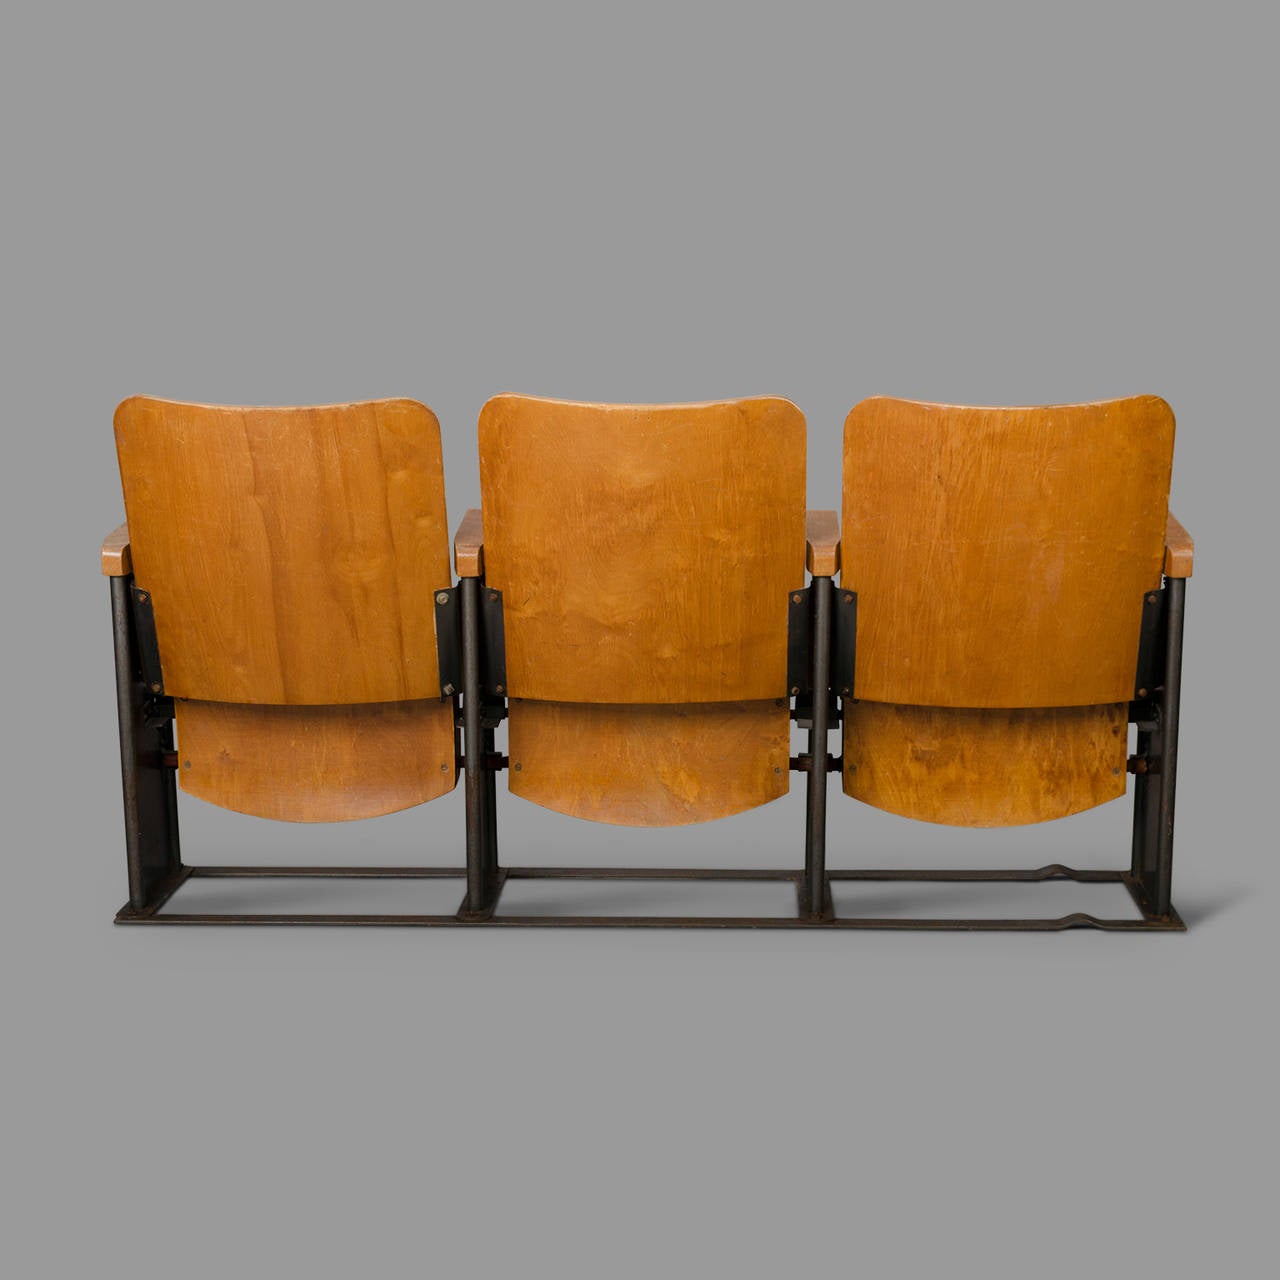 1950s Movie Theater Armchairs, From a Military Base 1